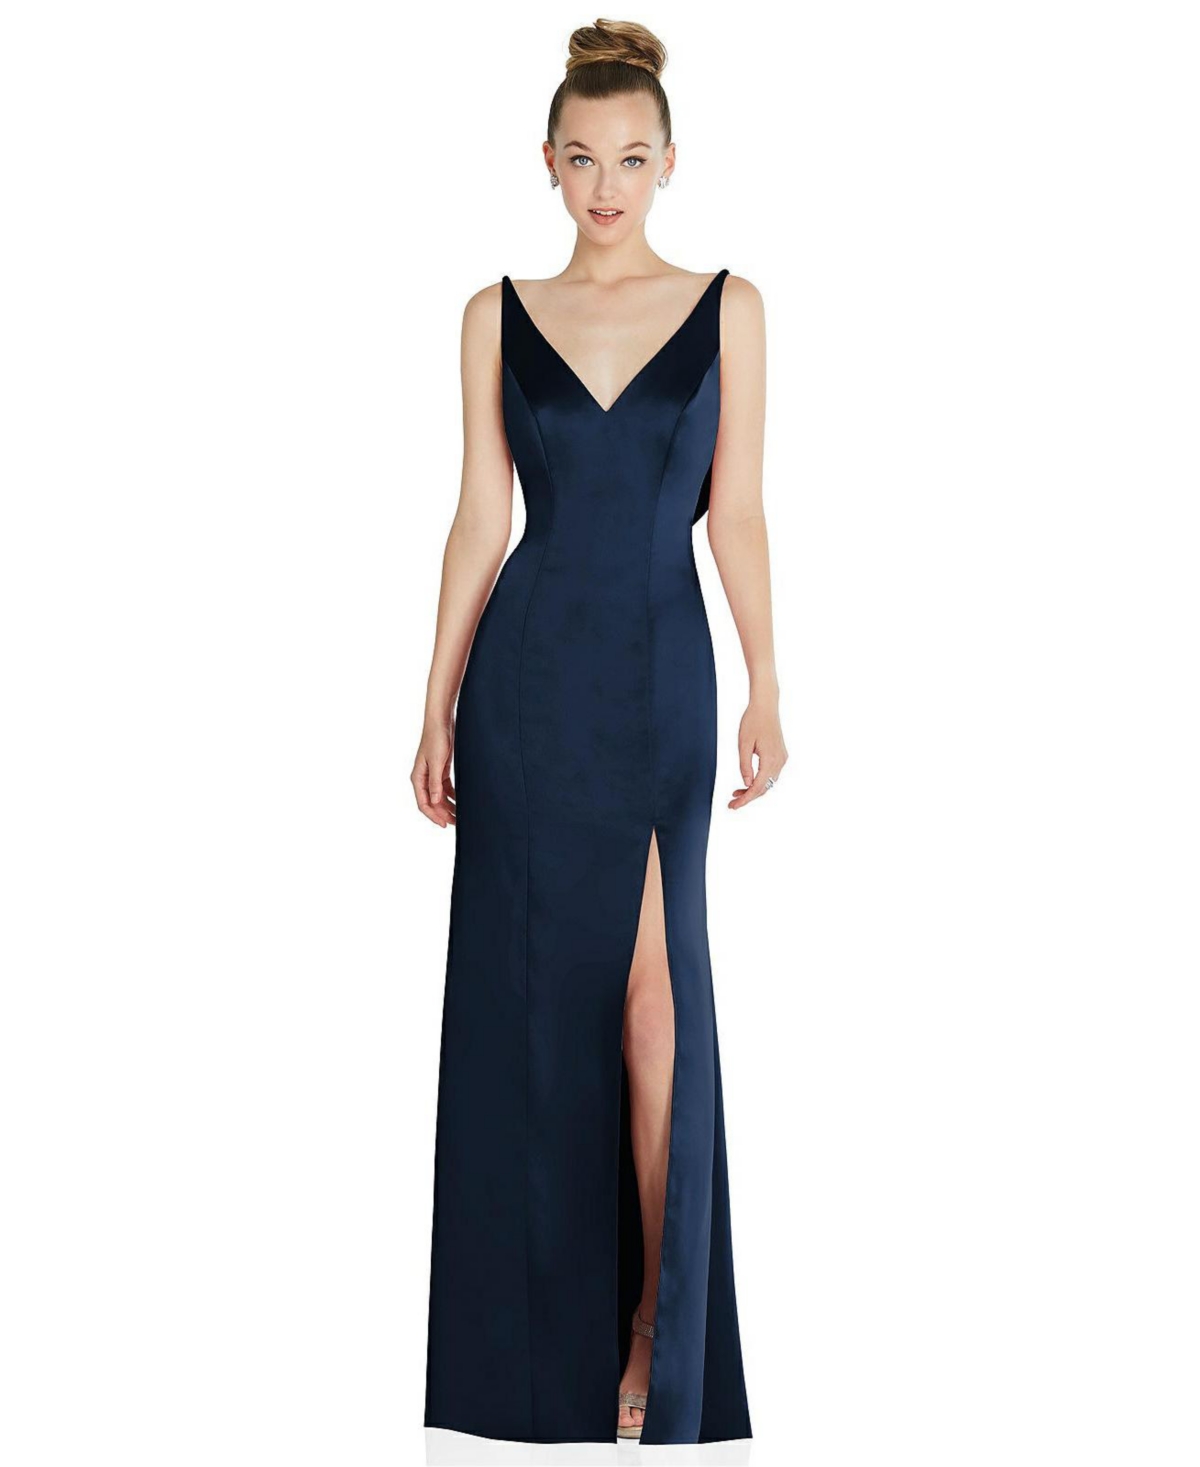 Draped Cowl-Back Princess Line Dress with Front Slit - Midnight navy